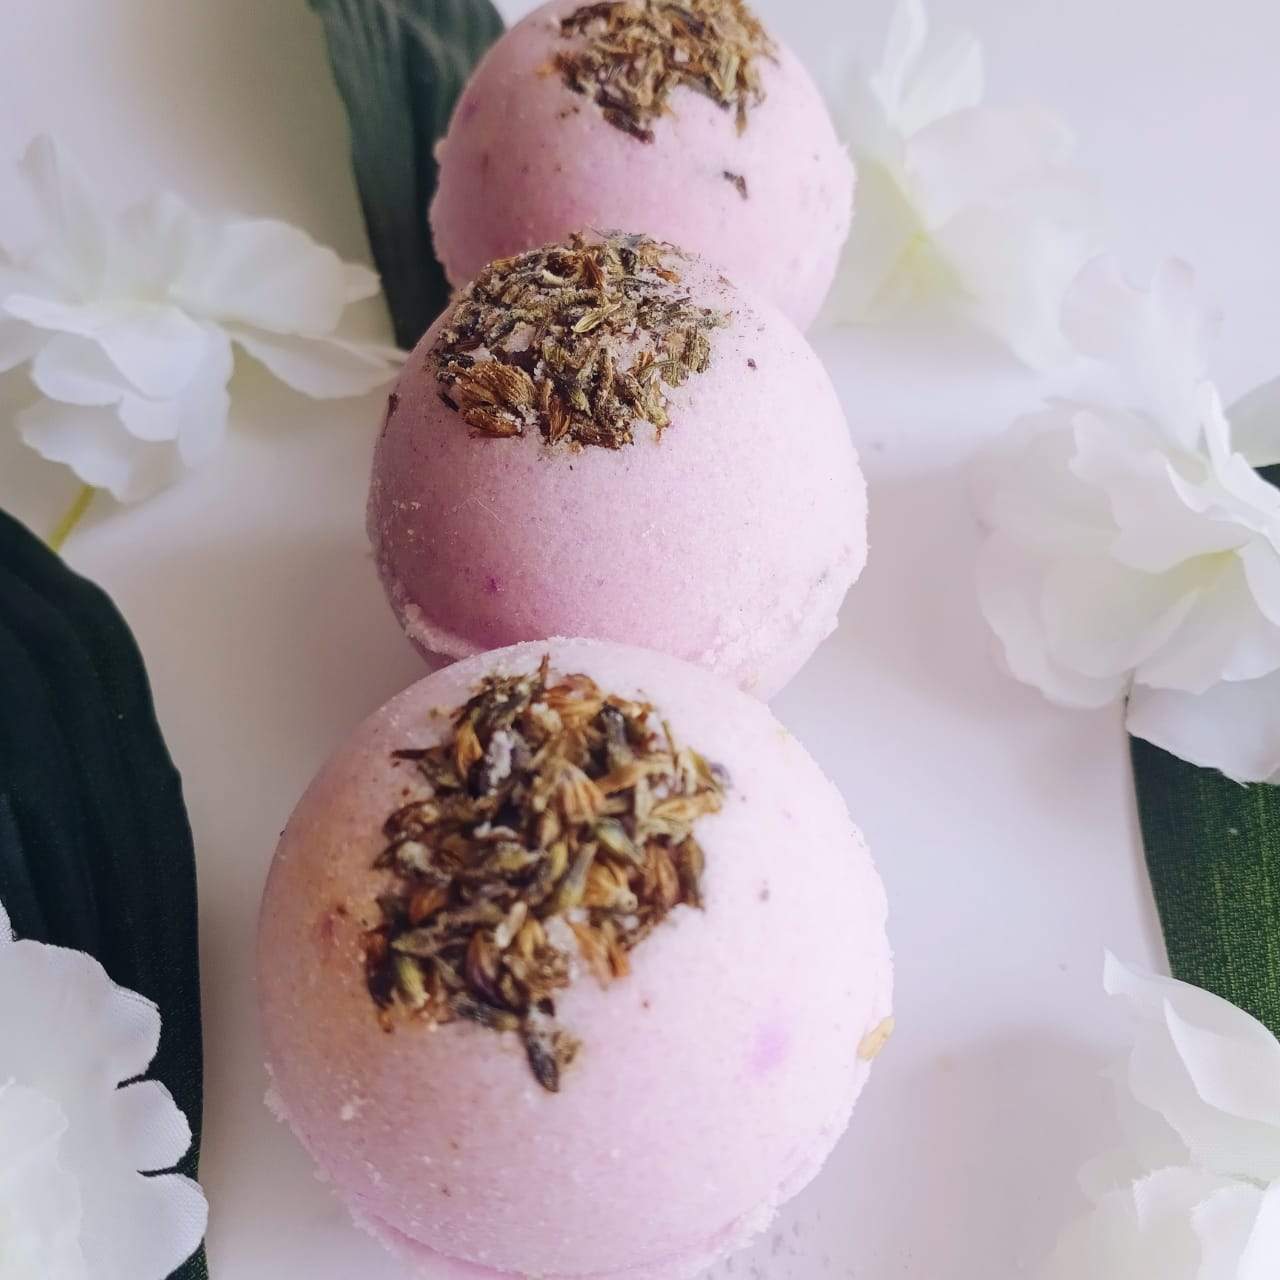 Lavender-Bath Bomb-Fizzy Aromatic Bath Bomb with Lavender Buds (75g Each) - Pack of 3 - aaranyam.com